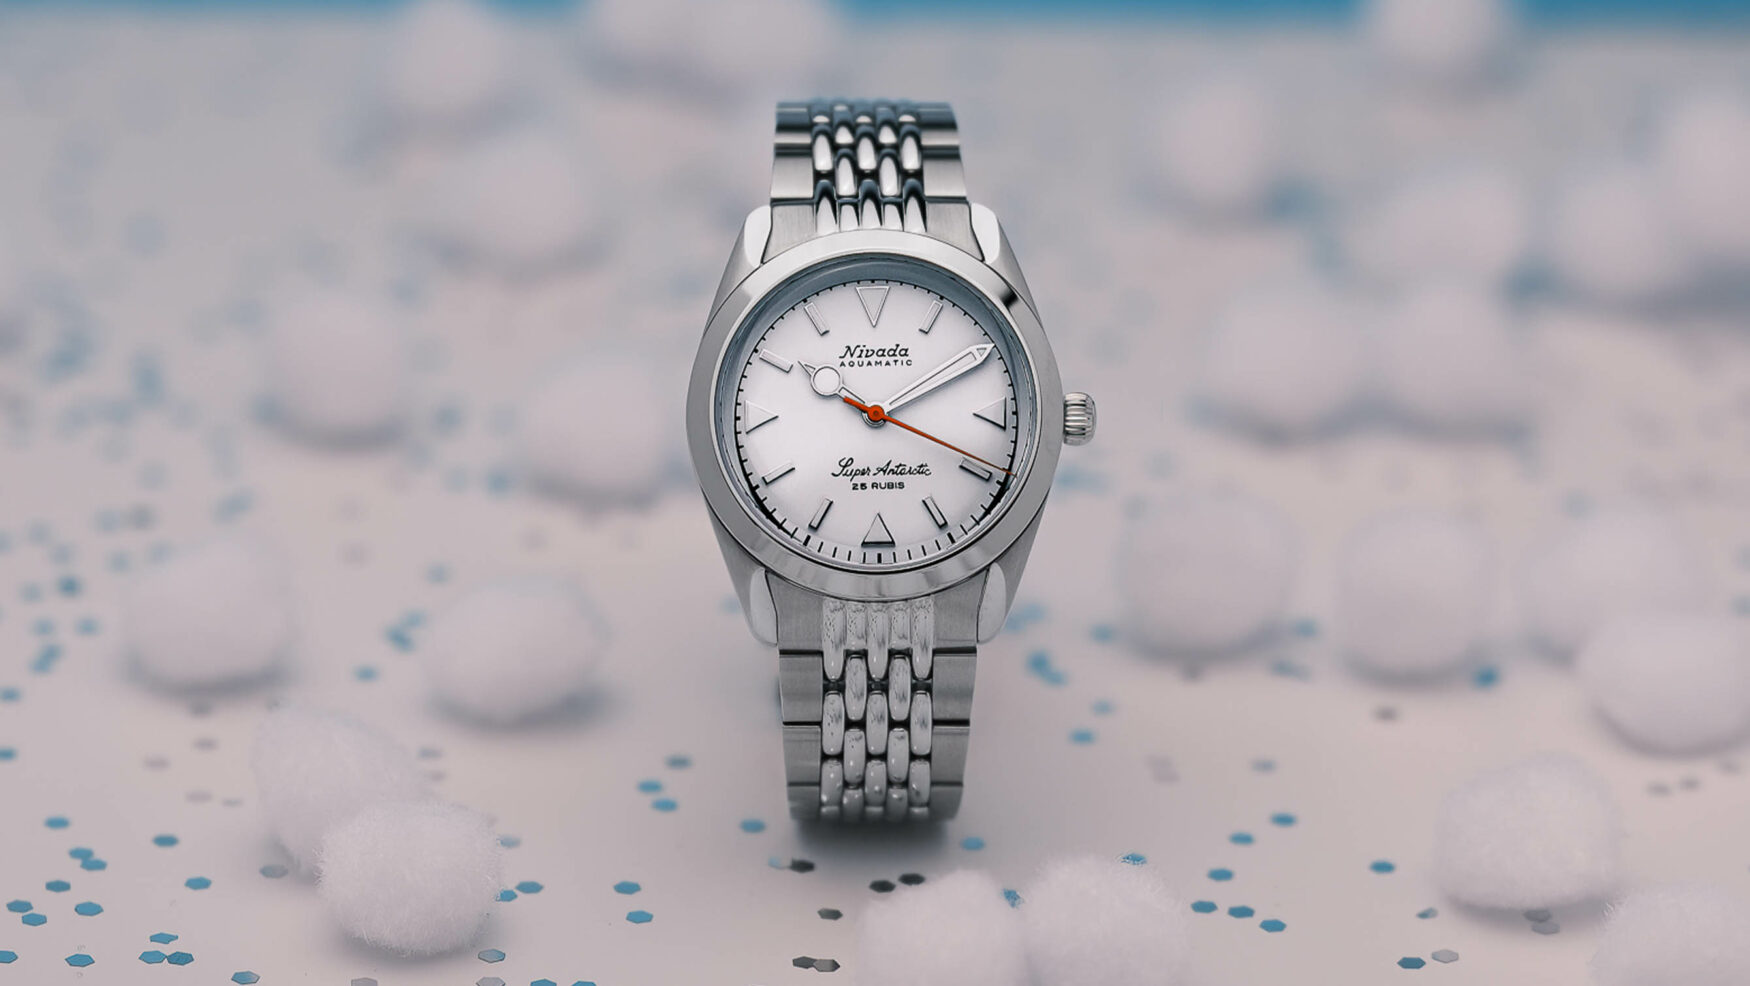 Go exploring with The Ace x Nivada Grenchen Super Antarctic Polar